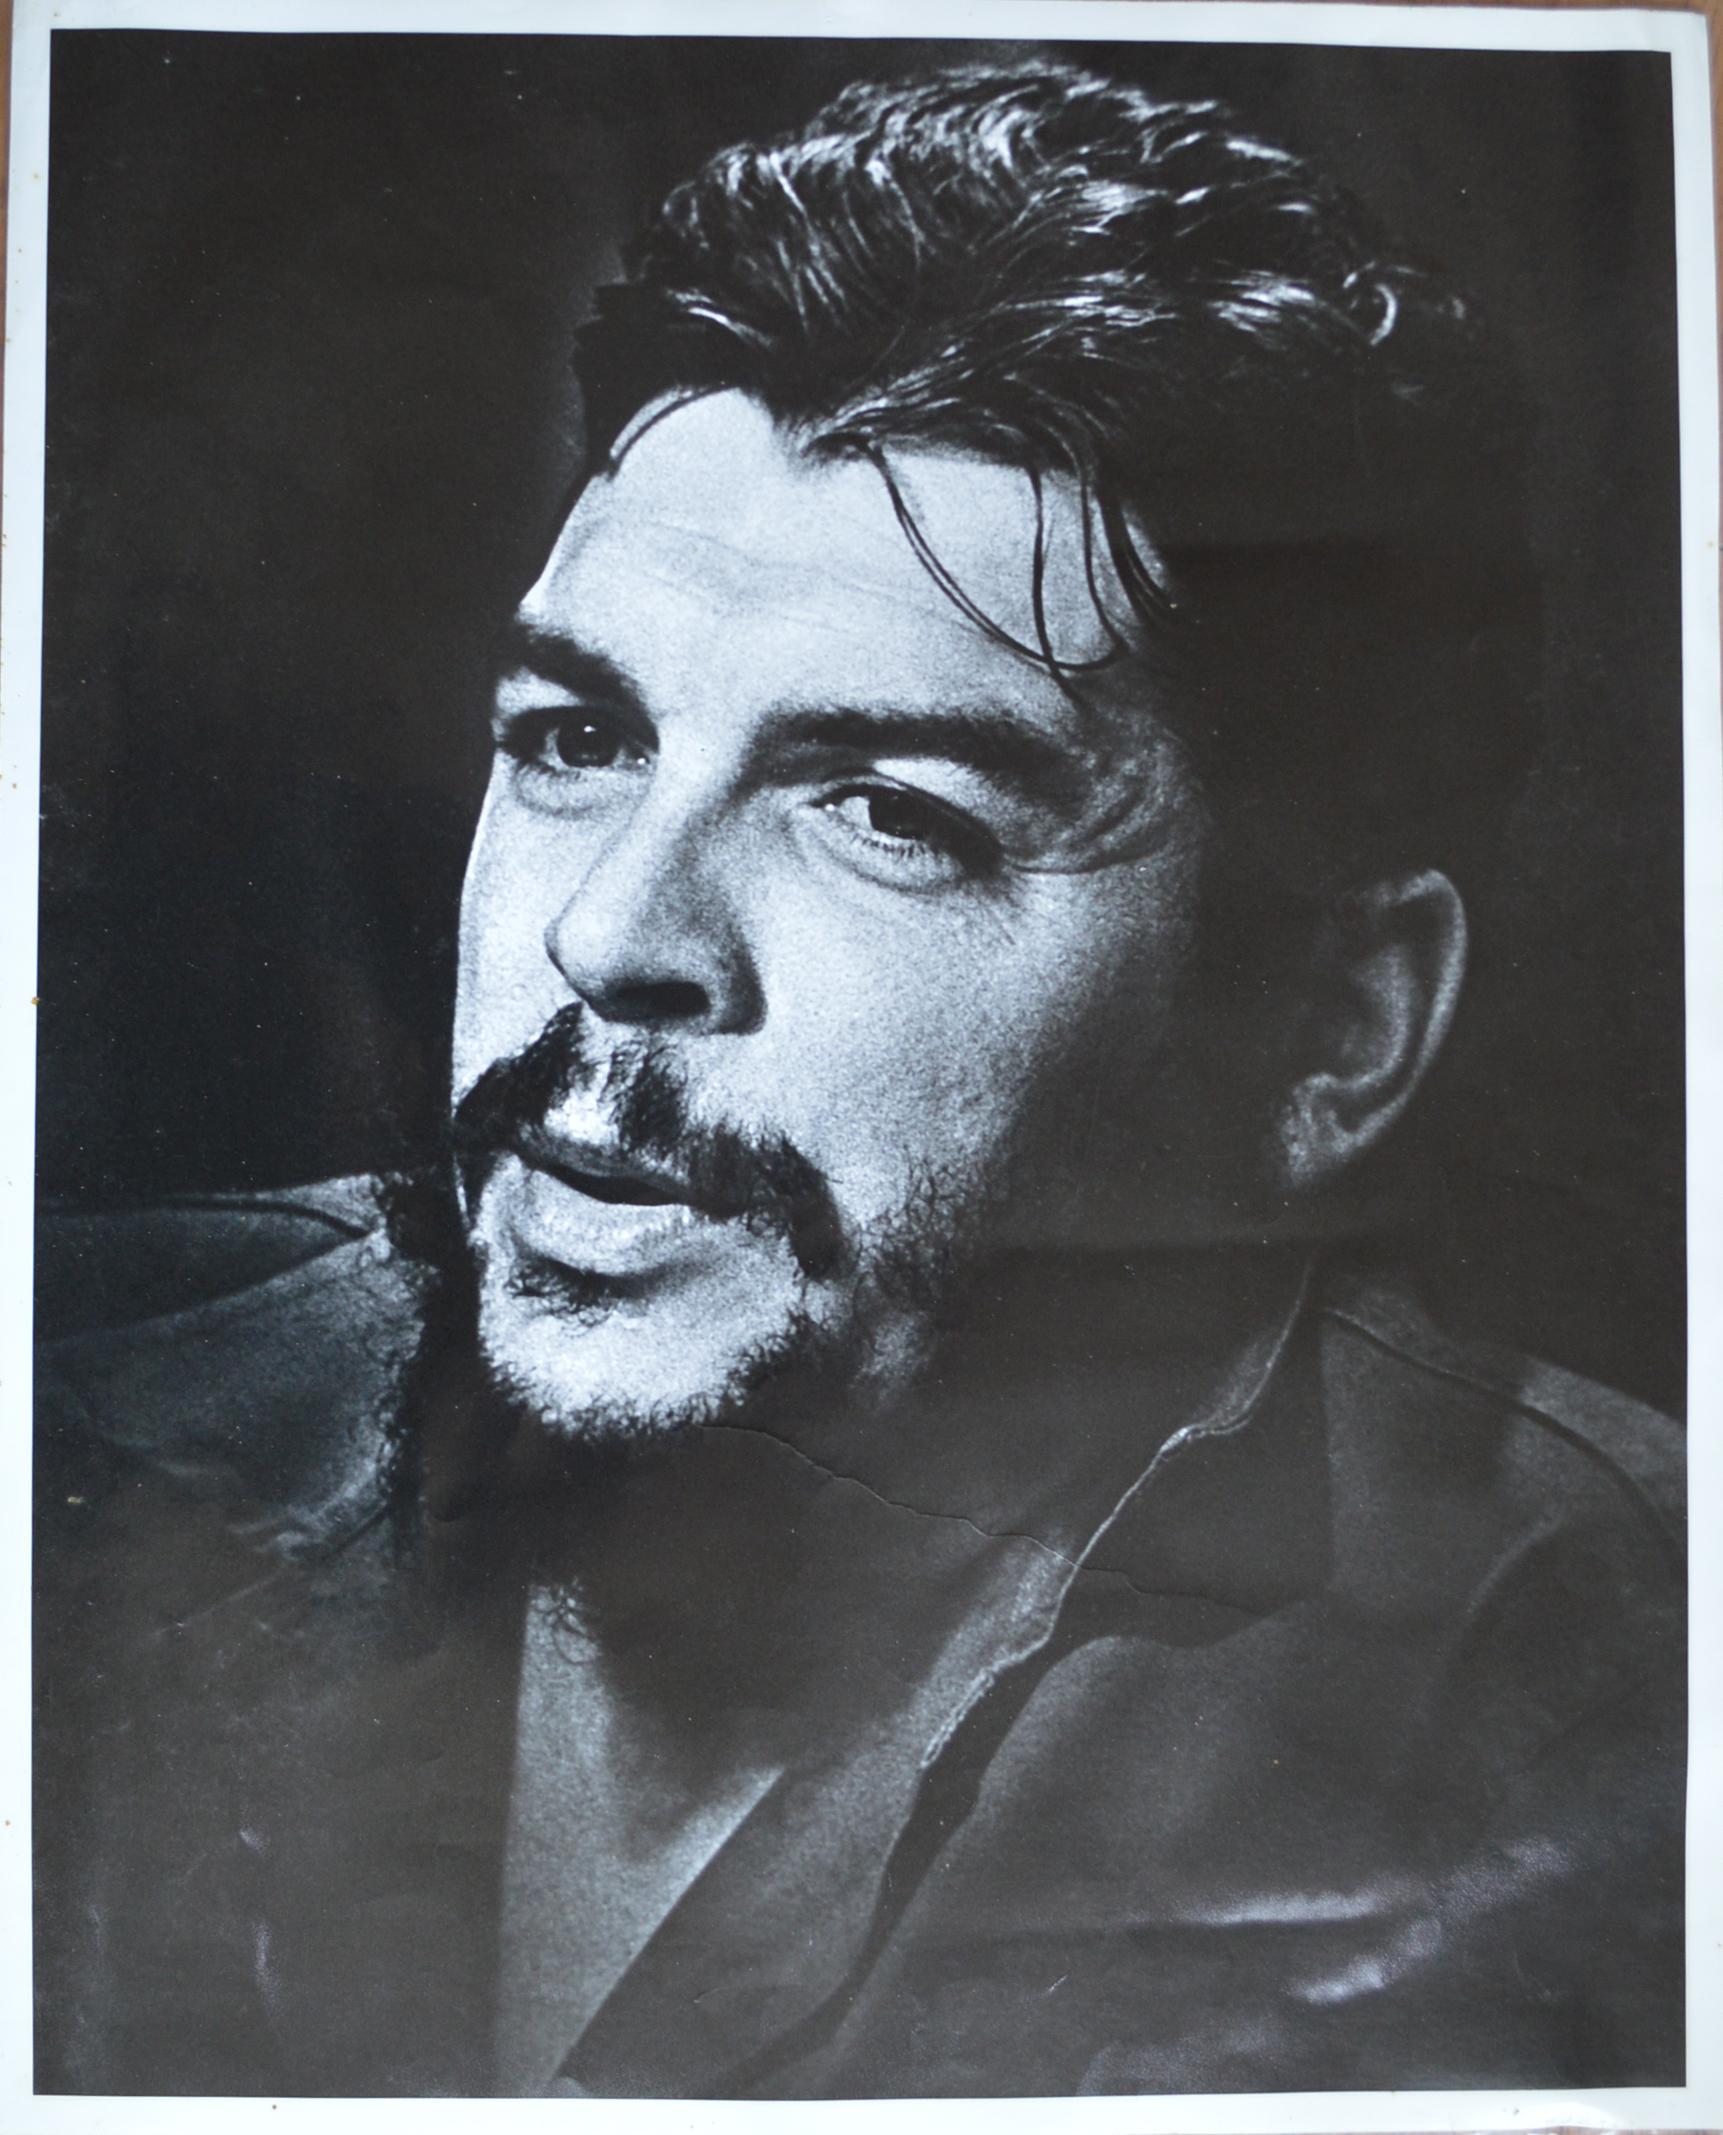 Rare Large format unpublished Cuban photo of Che Guevara by Venancio Díaz-Maique  
Circa 1963
Portrait of Che Guevara
Large size 59 x 48 cm 23 .25 x 19 inches
 
Venancio Díaz-Maique  Cuba (1916-2003)
Circa 1963 printed later probably  in 1970`s